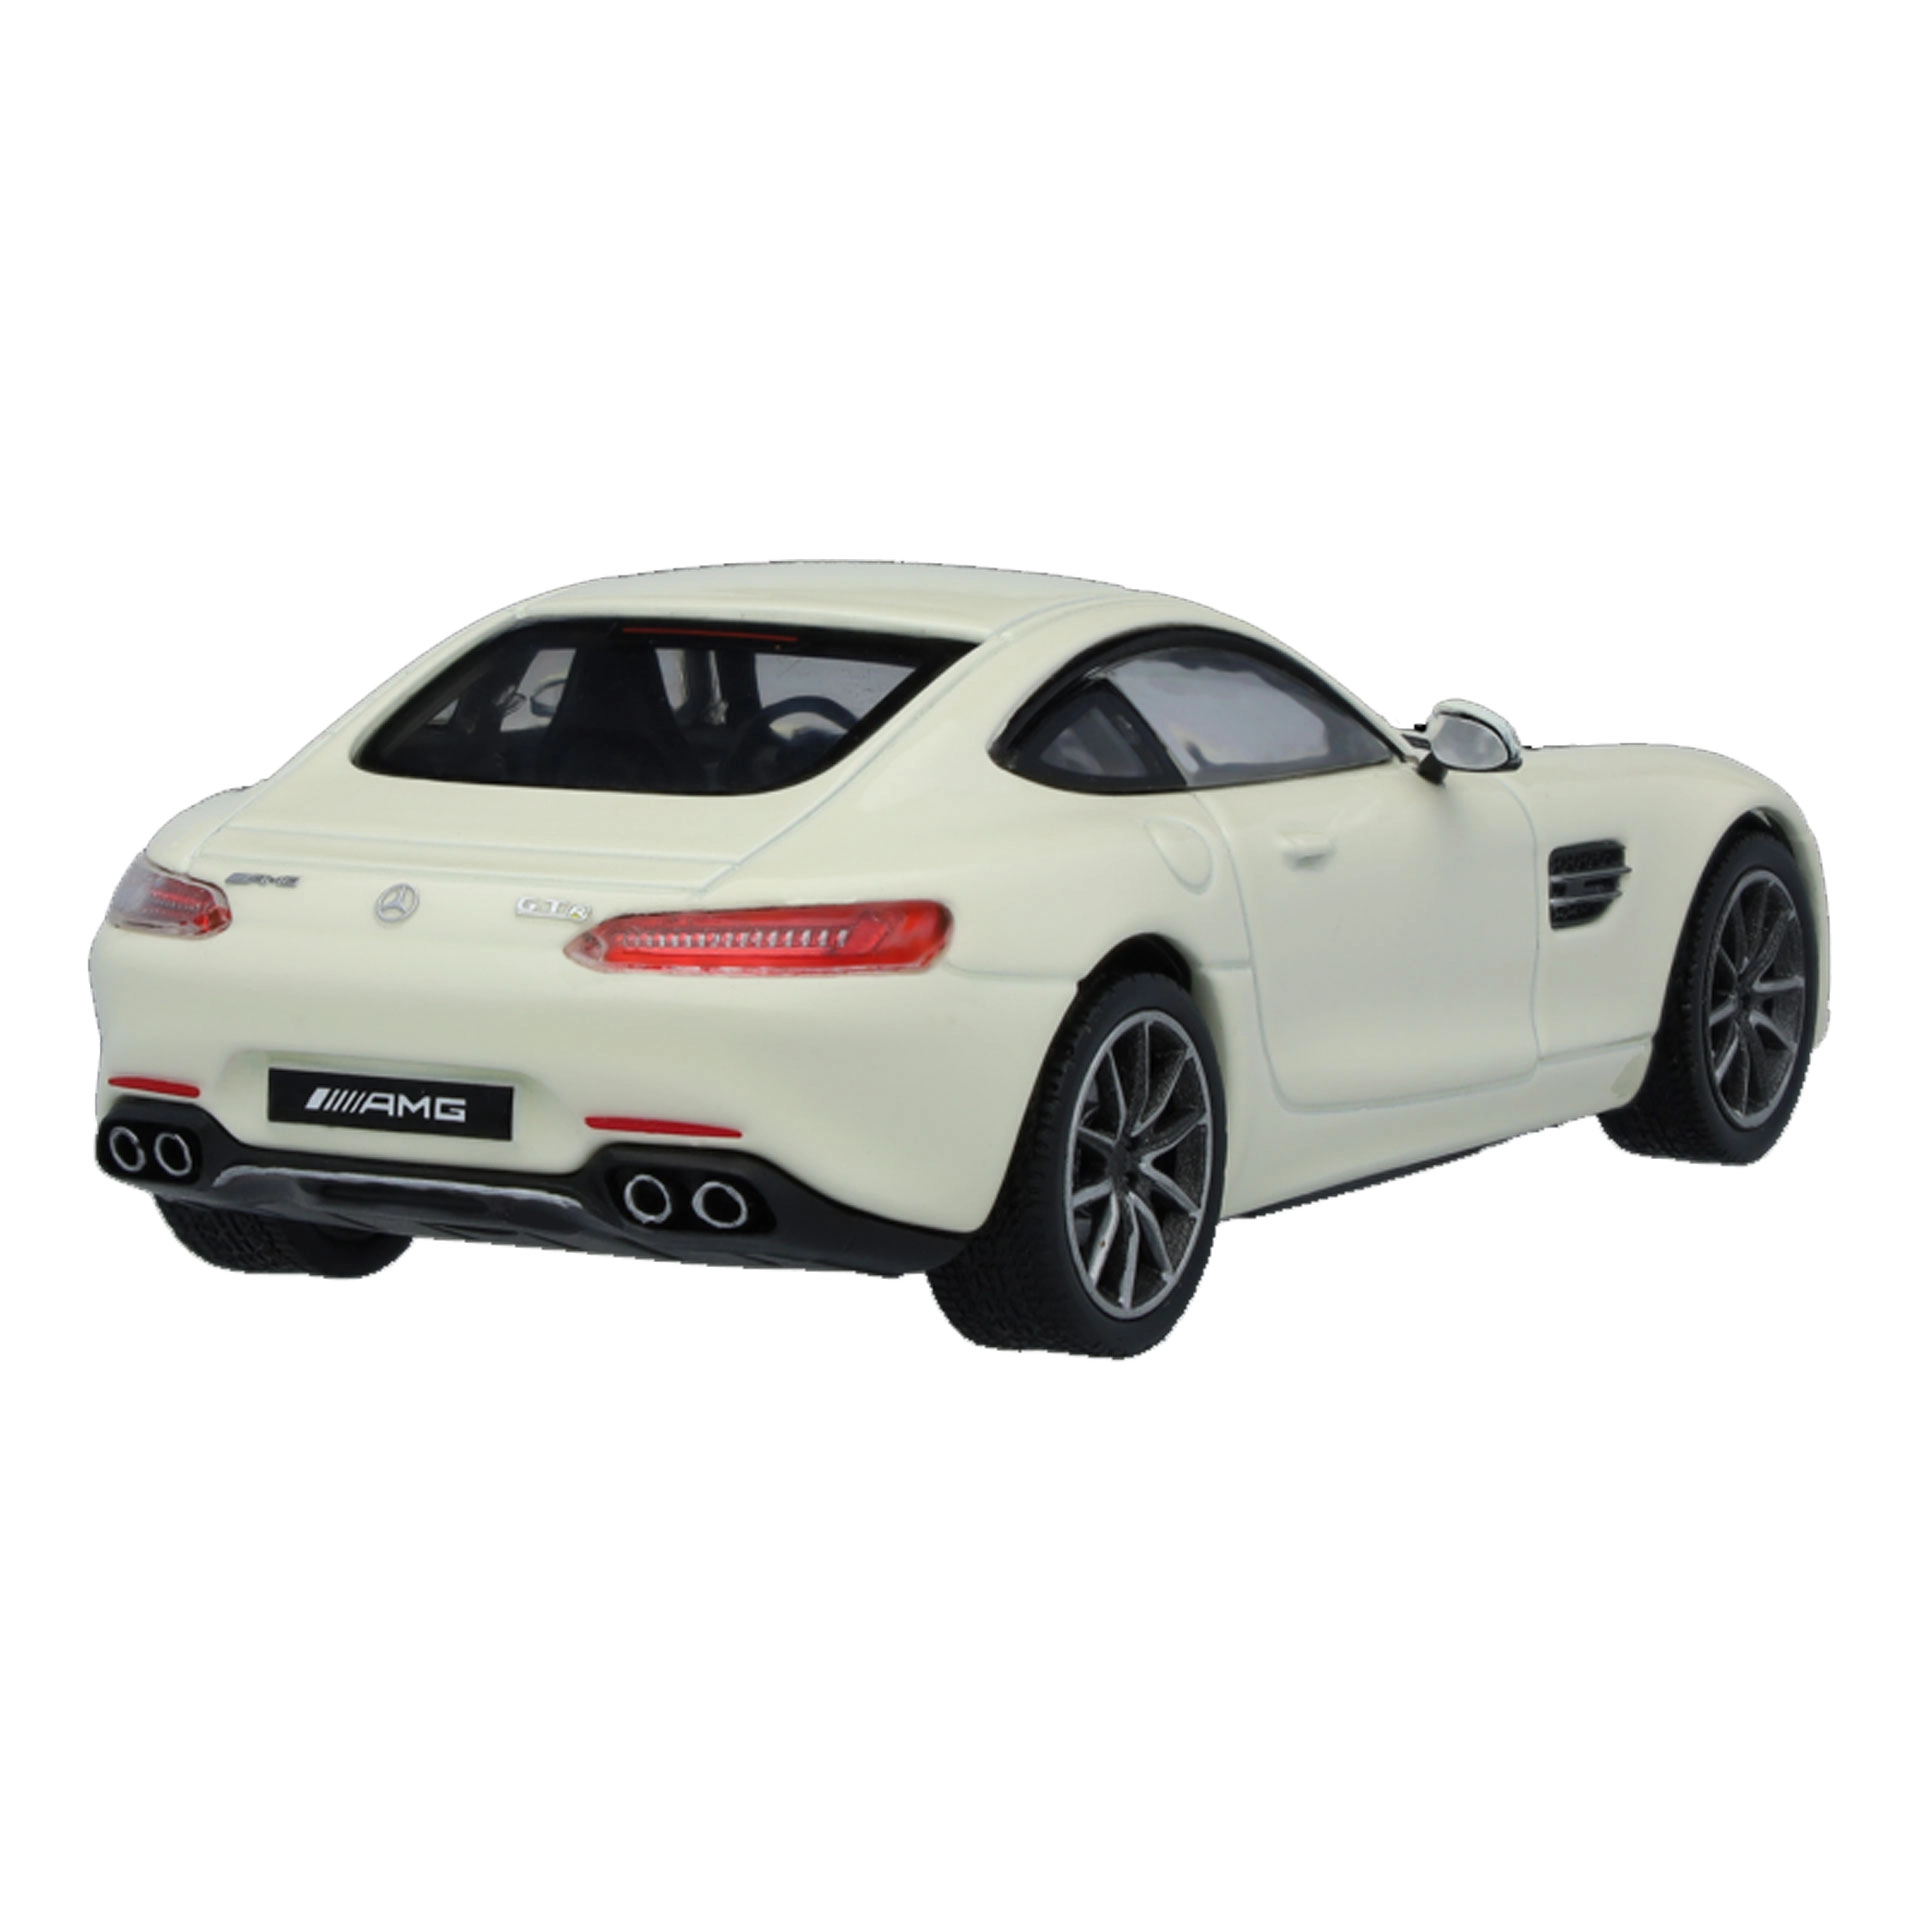 B66960482_mercedes-amg_modellauto_gt_coupe_c190_rosier-onlineshop2